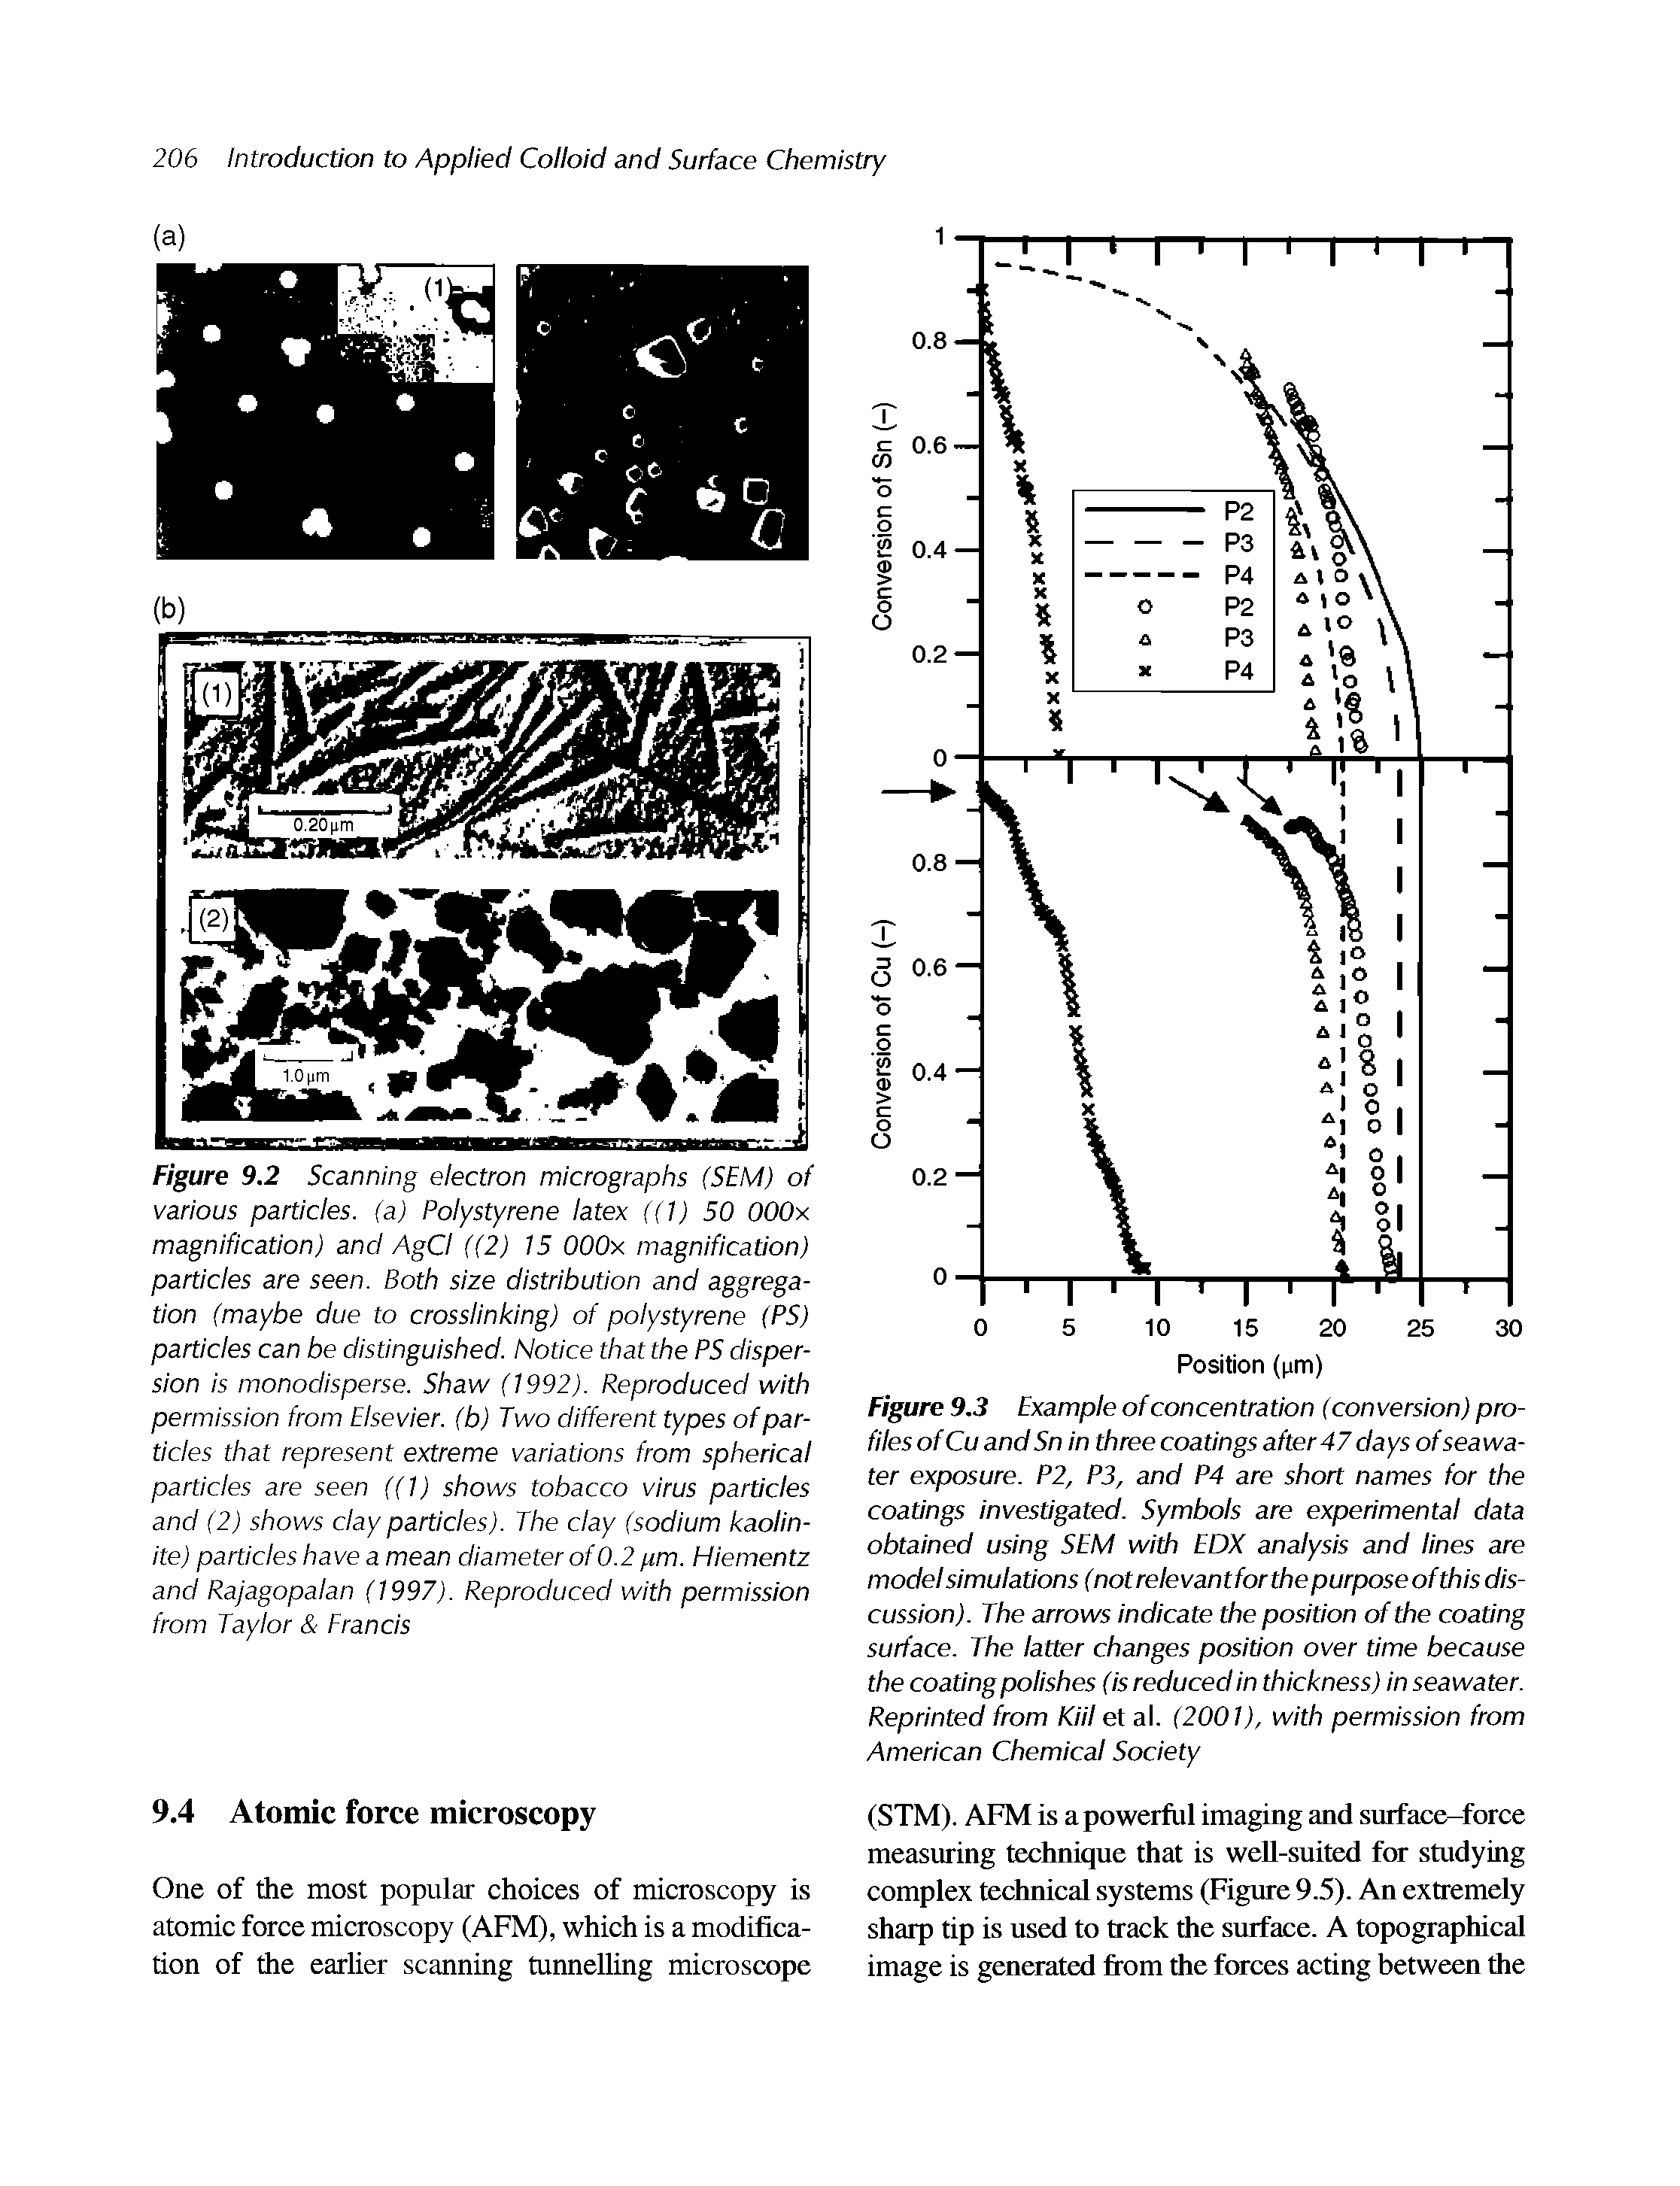 Figure 9.2 Scanning electron micrographs (SEM) of various particles, (a) Polystyrene latex (( ) 50 OOOx magnification) and AgCI ((2) 15 OOOx magnification) particles are seen. Both size distribution and aggregation (maybe due to crosslinking) of polystyrene (PS) particles can be distinguished. Notice that the PS dispersion is monodisperse. Shaw (1992). Reproduced with permission from Elsevier, (b) Two different types of particles that represent extreme variations from spherical particles are seen (( ) shows tobacco virus particles and (2) shows clay particles). The clay (sodium kaolin-Ite) particles have a mean diameter of 0.2 pm. Hiementz and Rajagopalan (1997). Reproduced with permission from Taylor Francis...